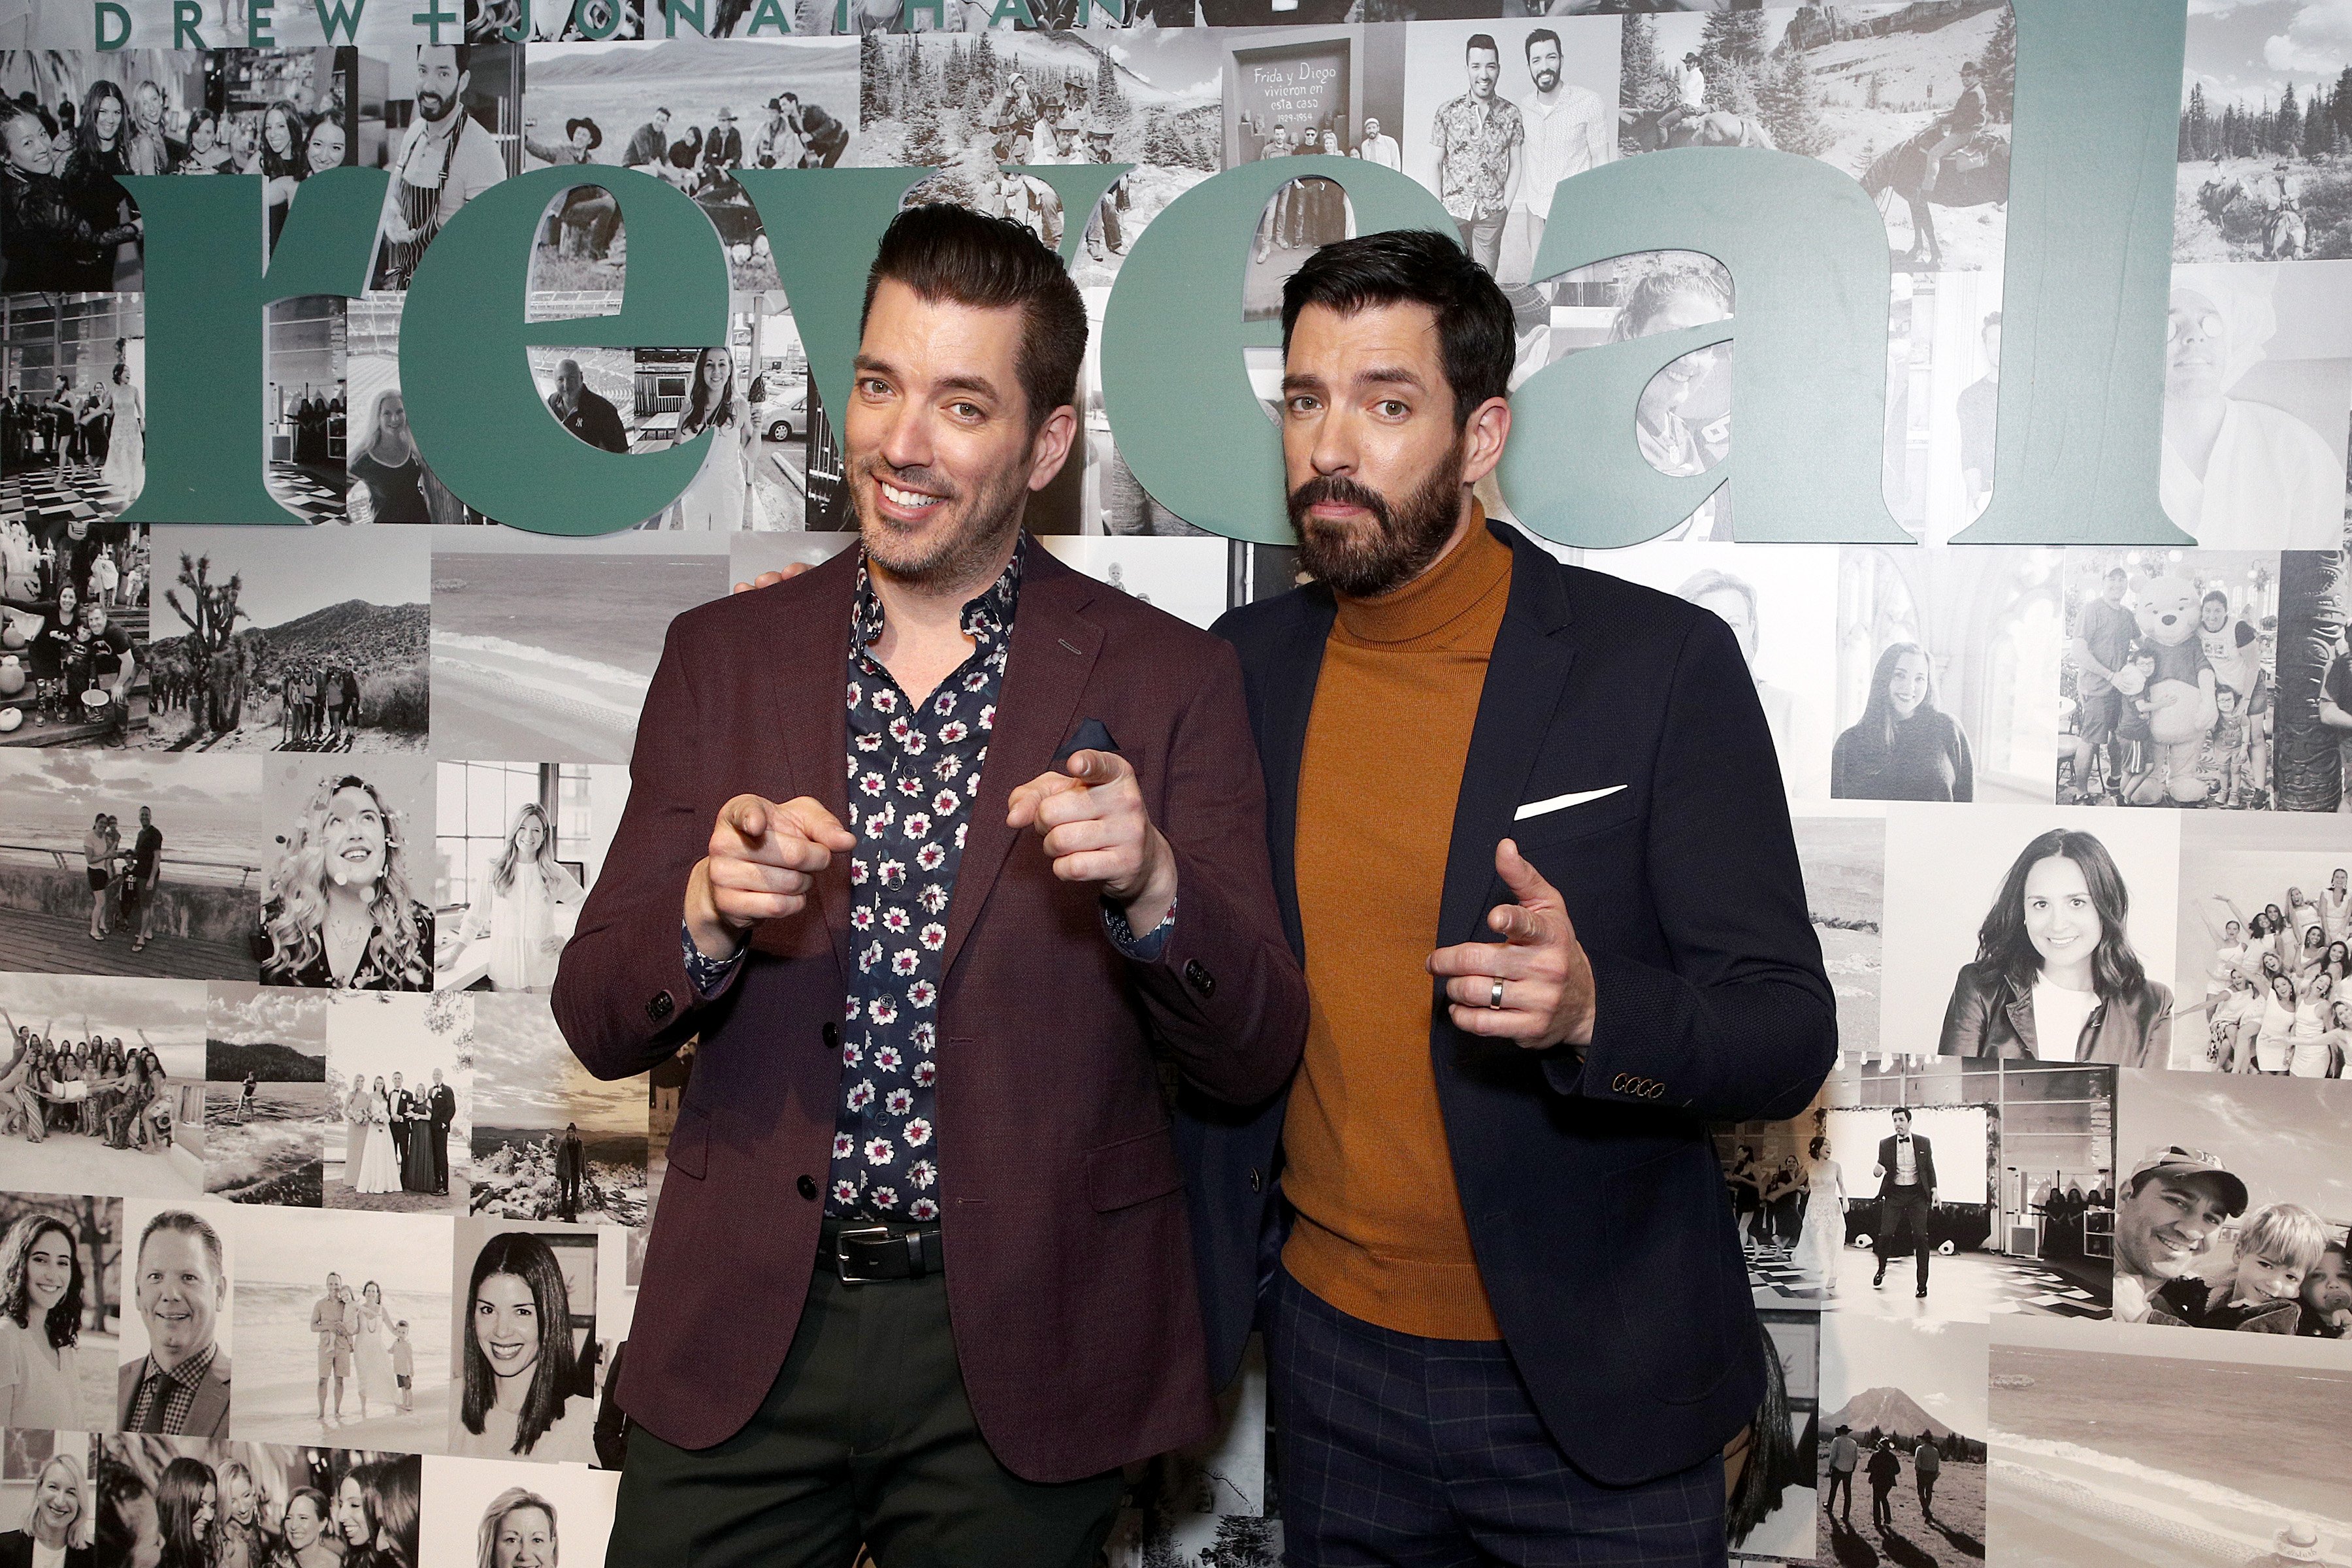 Jonathan Scott and Drew Scott celebrate the premier issue of New Meredith Corporation's lifestyle publication Reveal at Meredith, INC on January 09, 2020 in New York City | Source: Getty Images